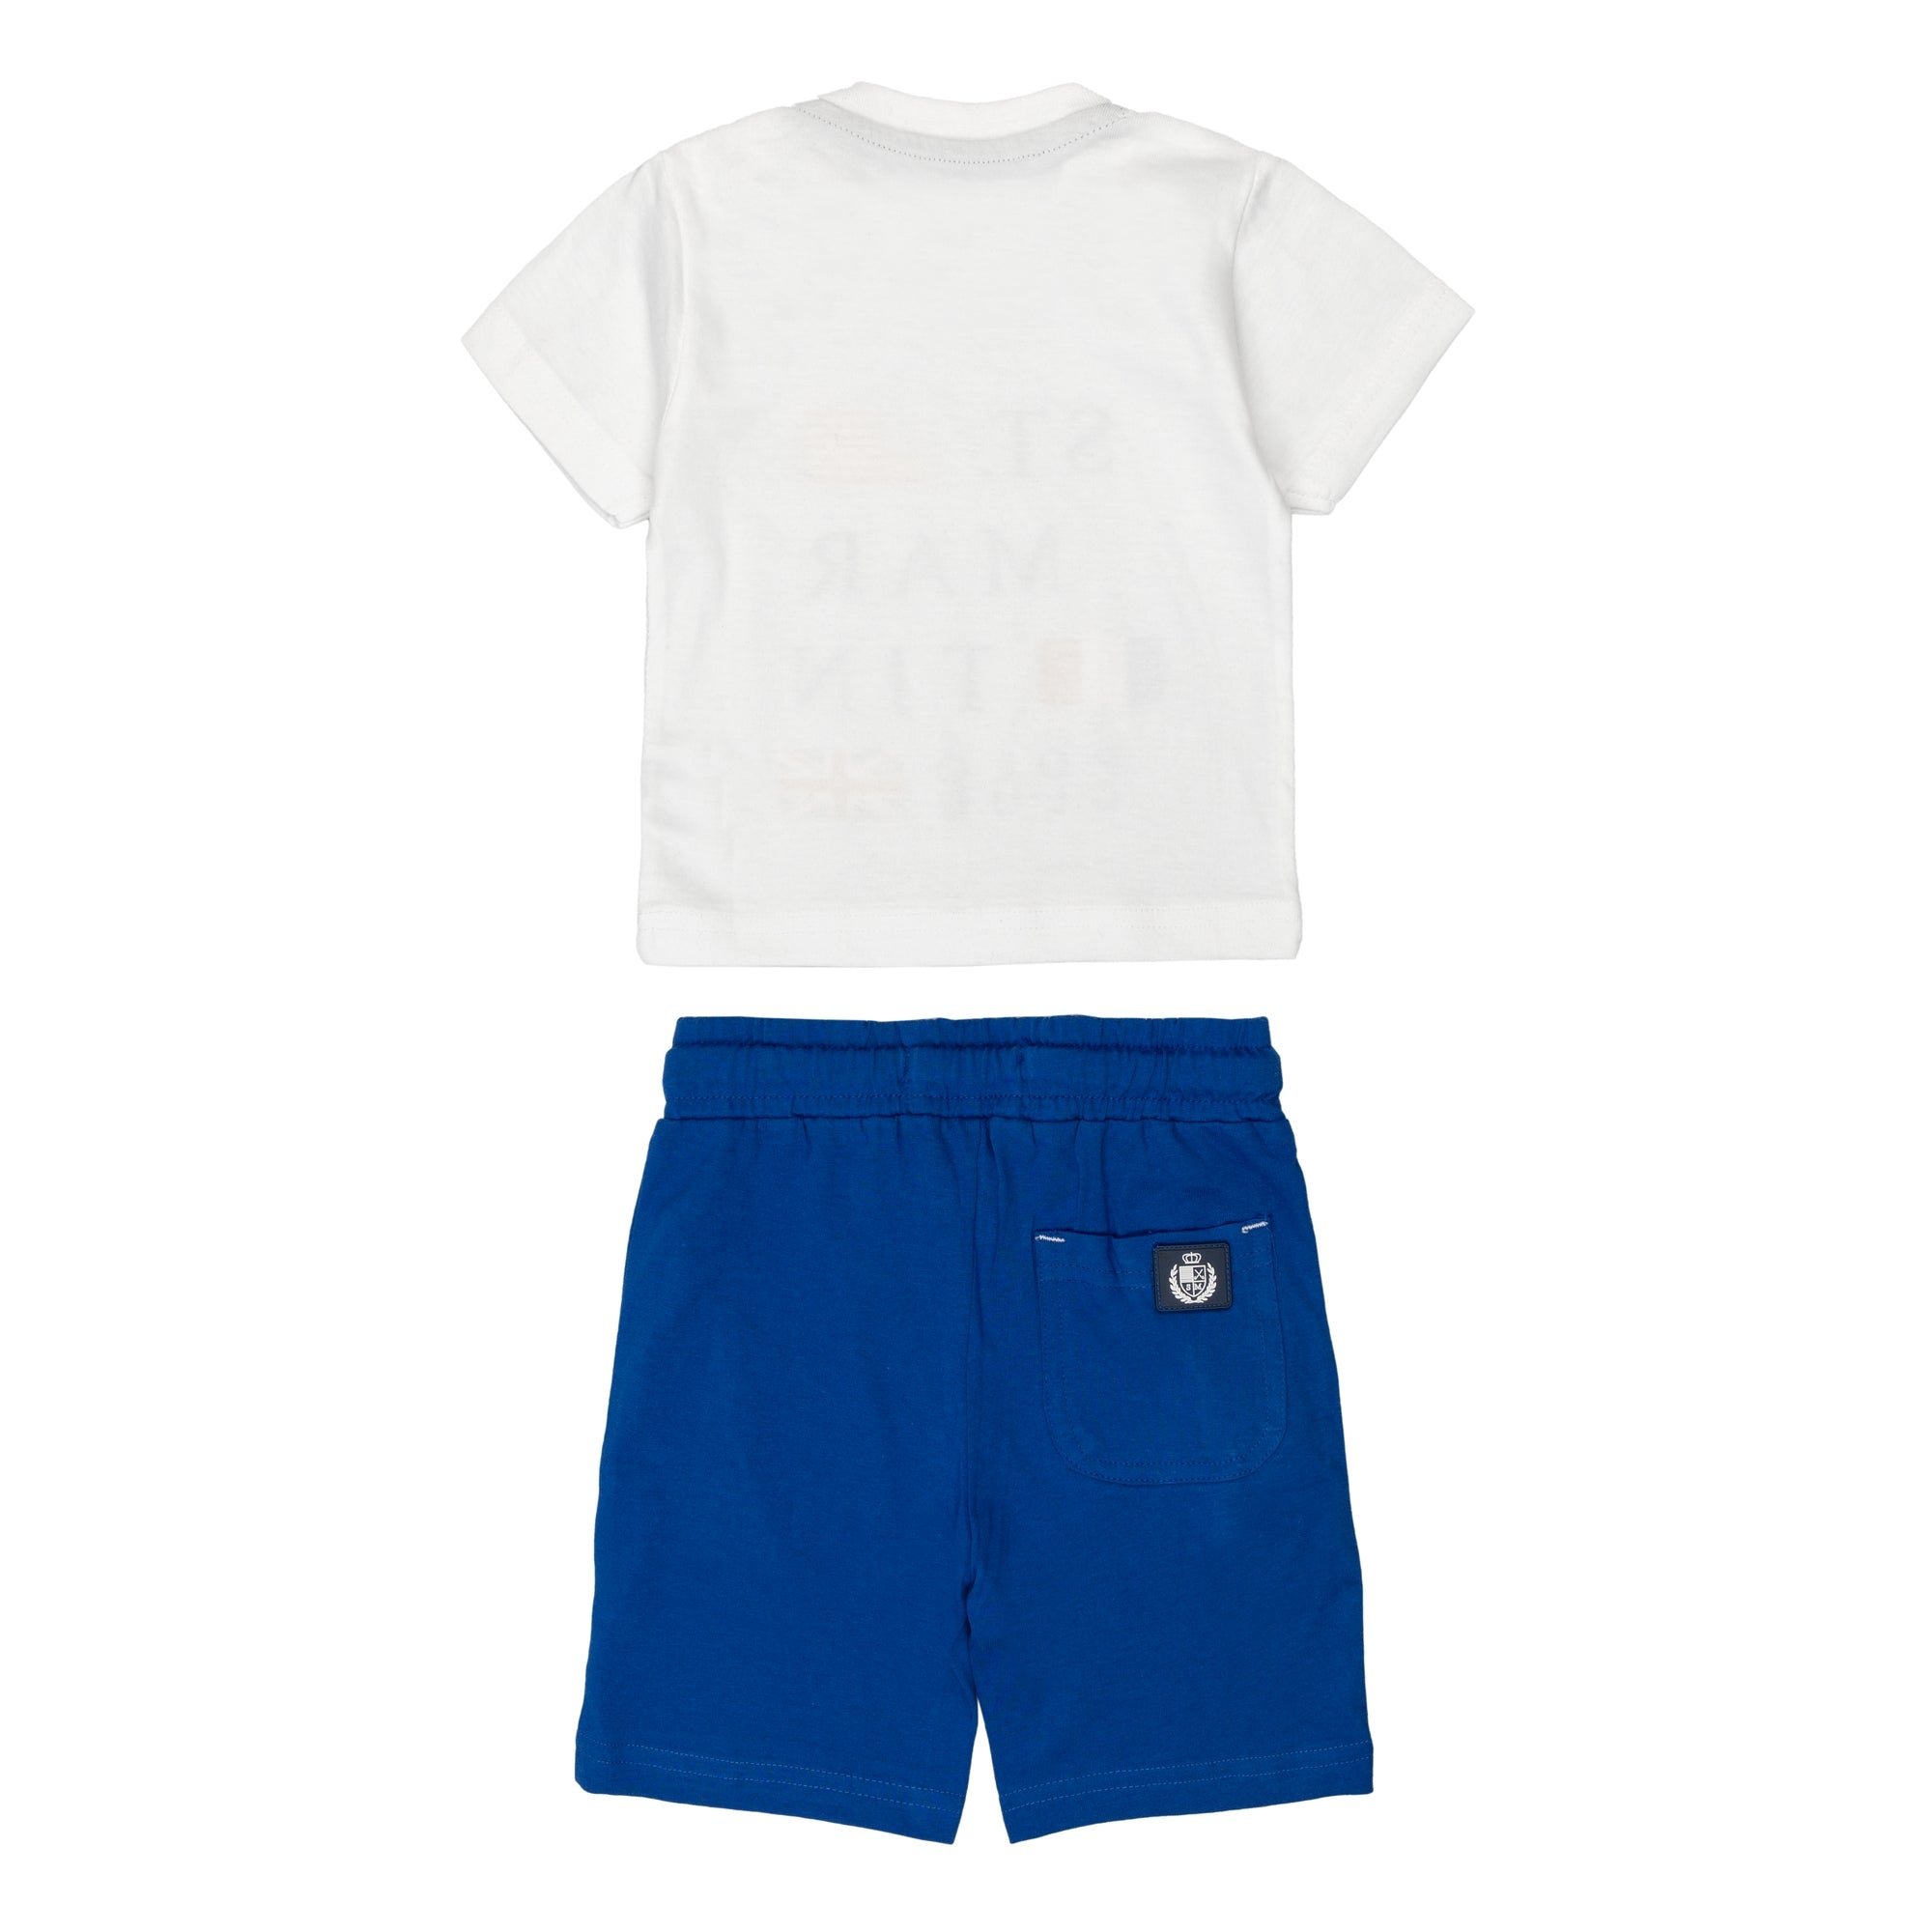 T-shirt and jersey shorts set with flags logo print